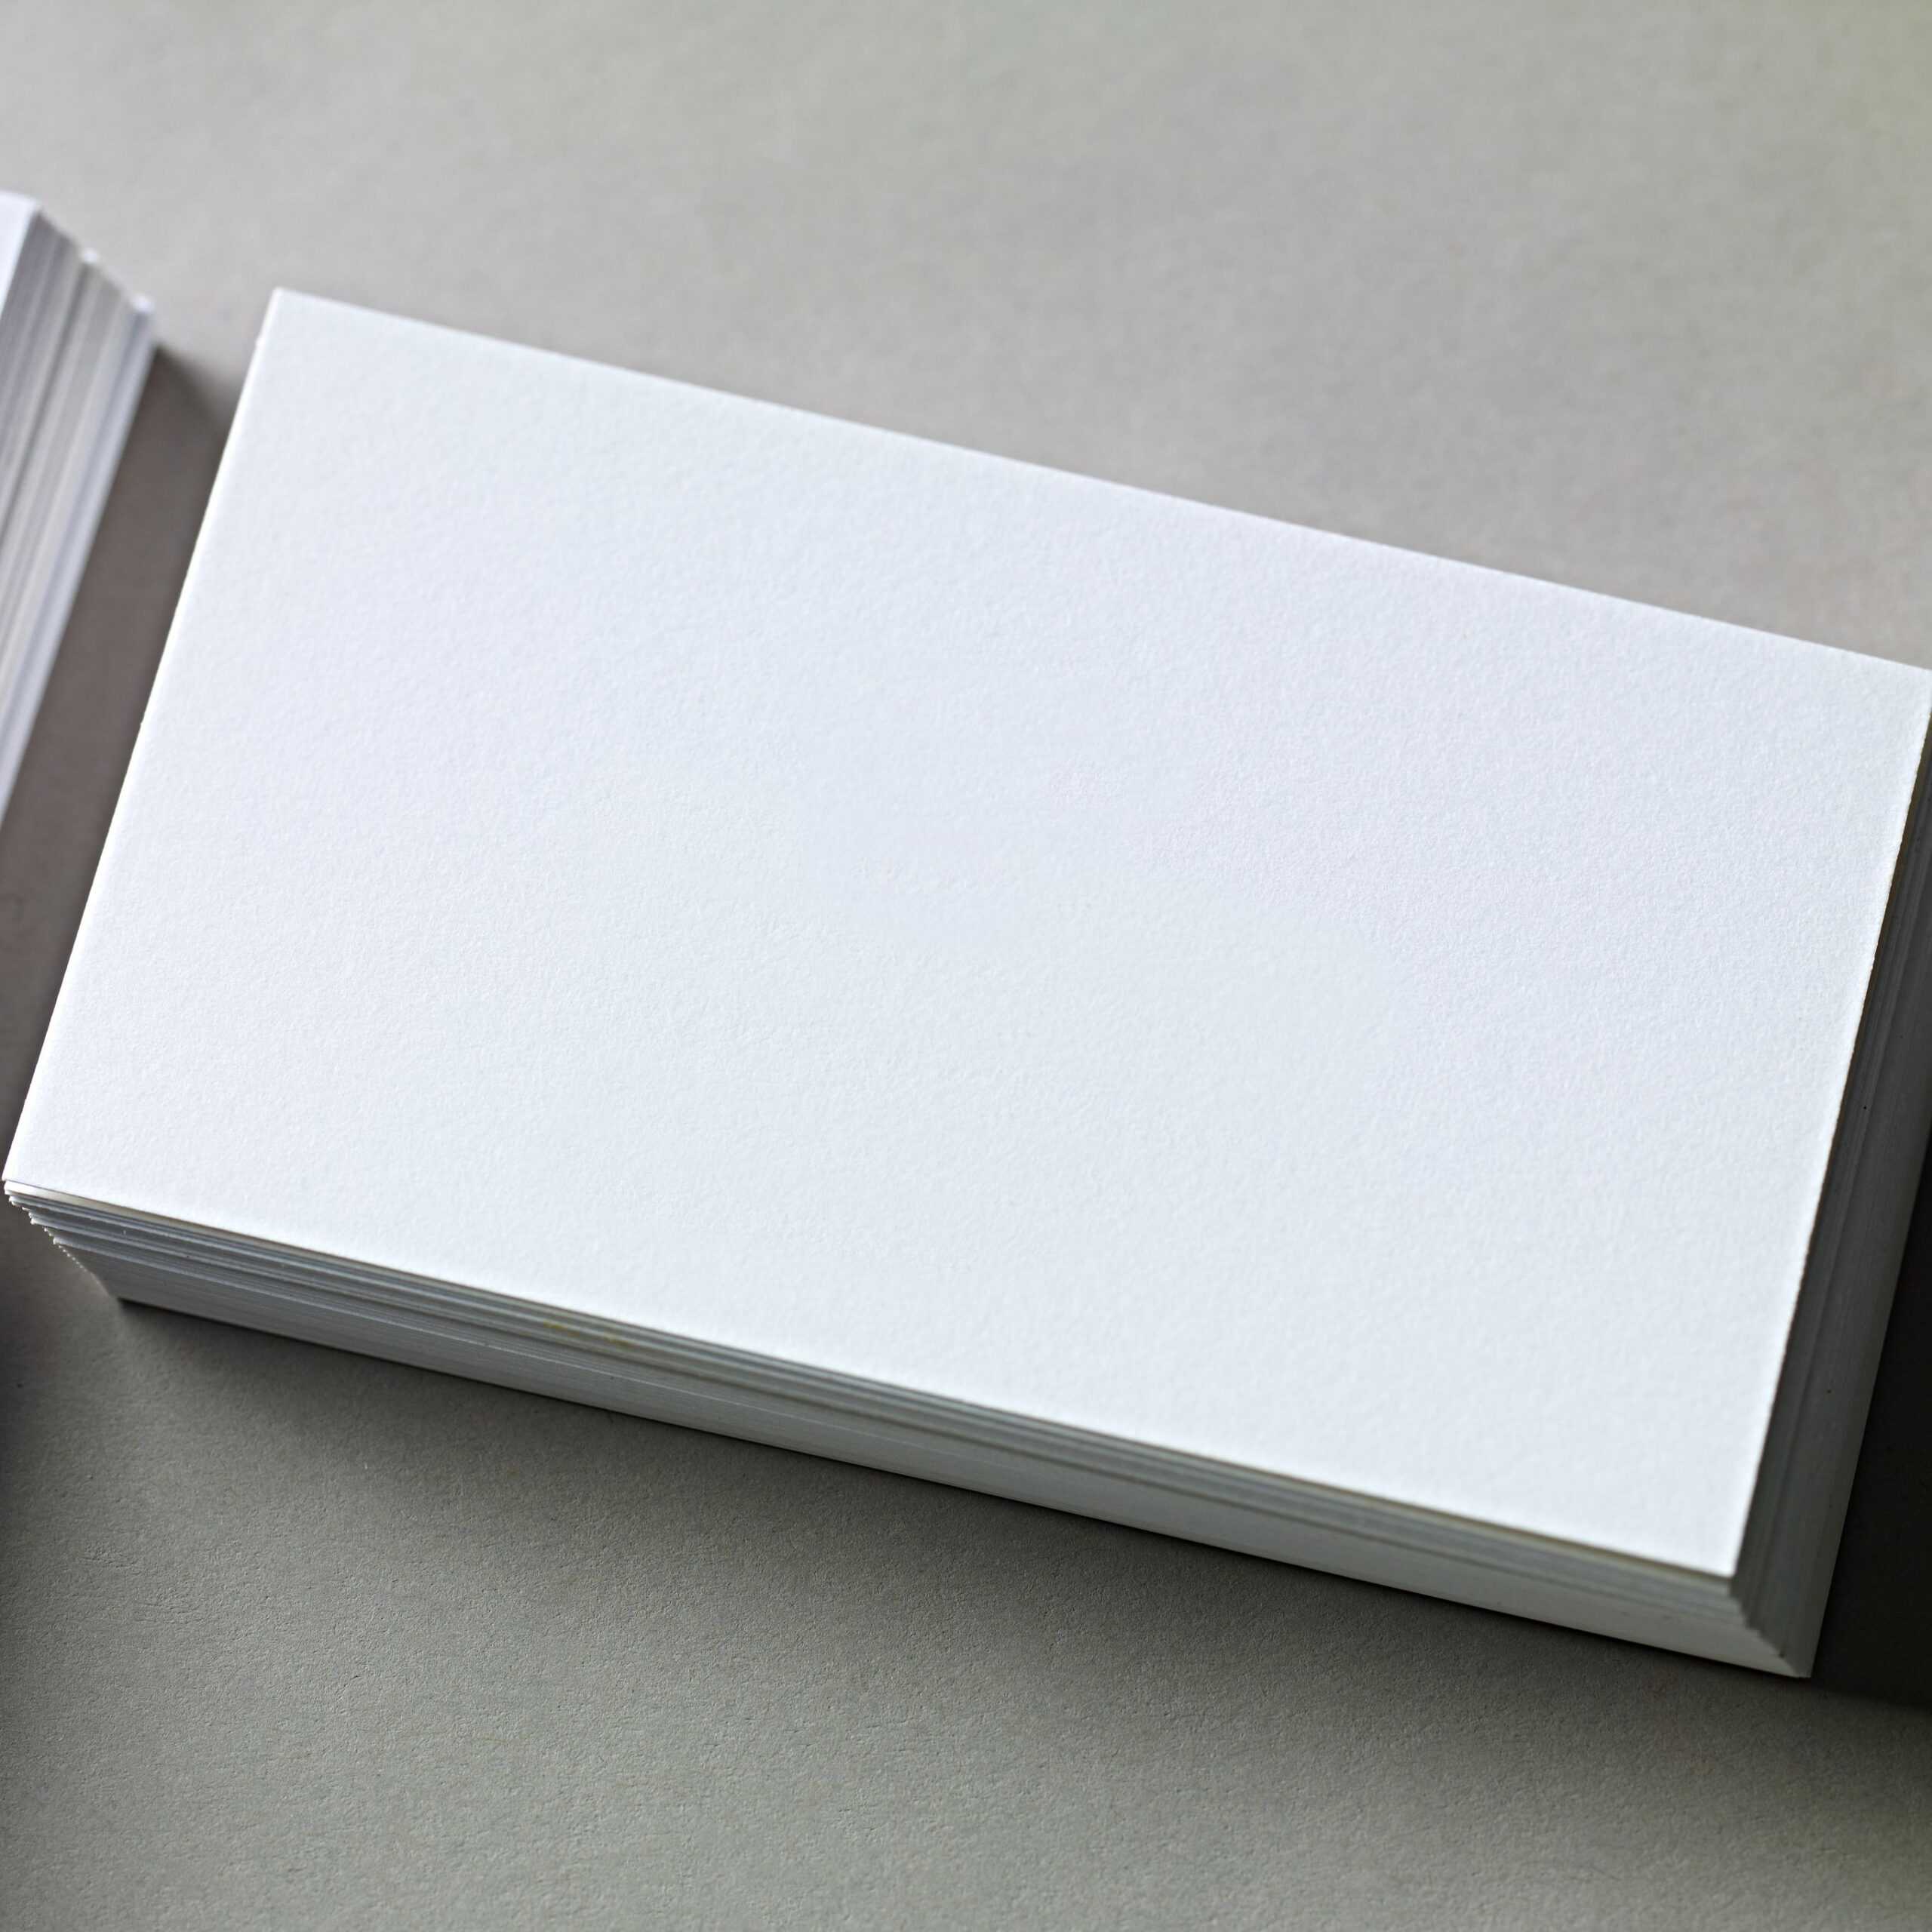 Free Blank Business Card Templates With Plain Business Card Template